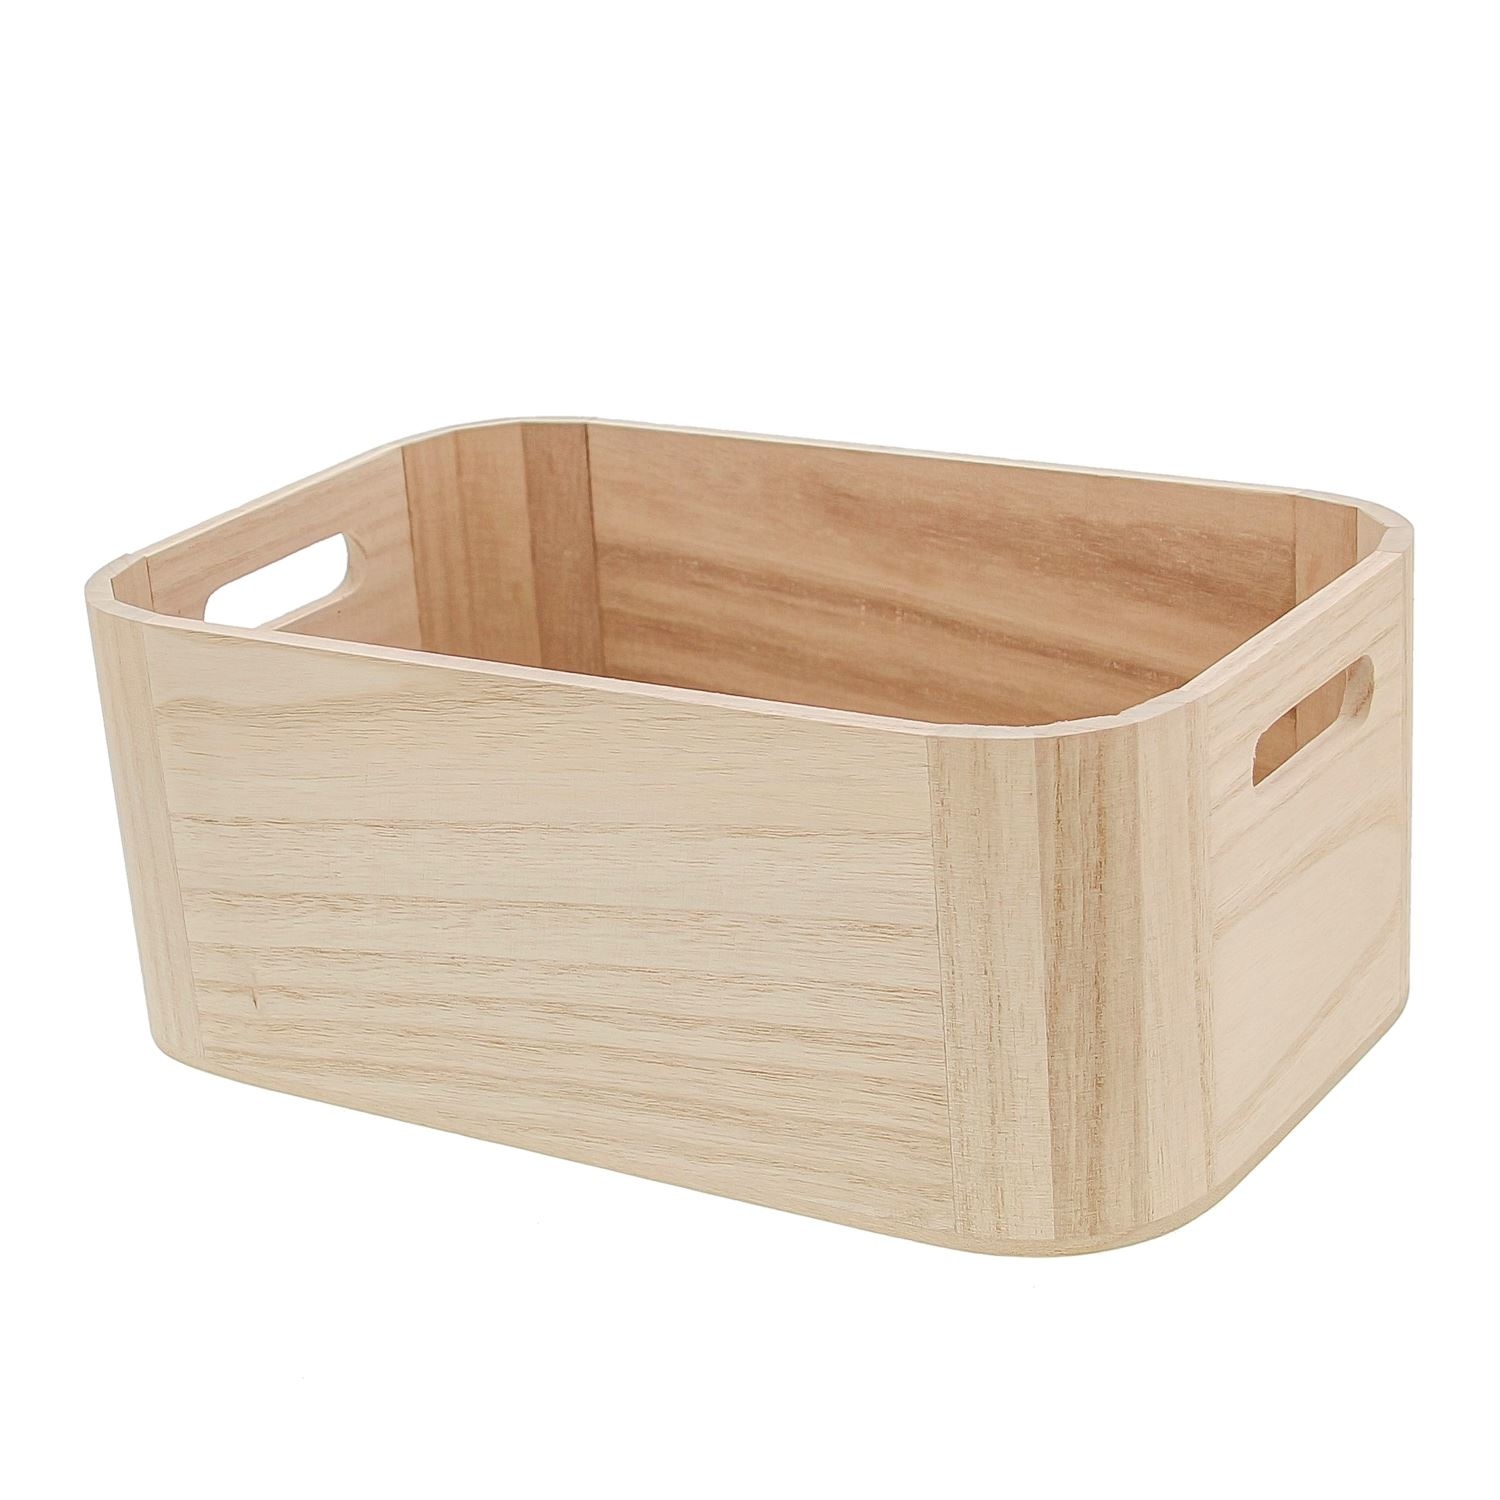 Rectangular high container with handle natural - 280*180*110mm - 3 pieces